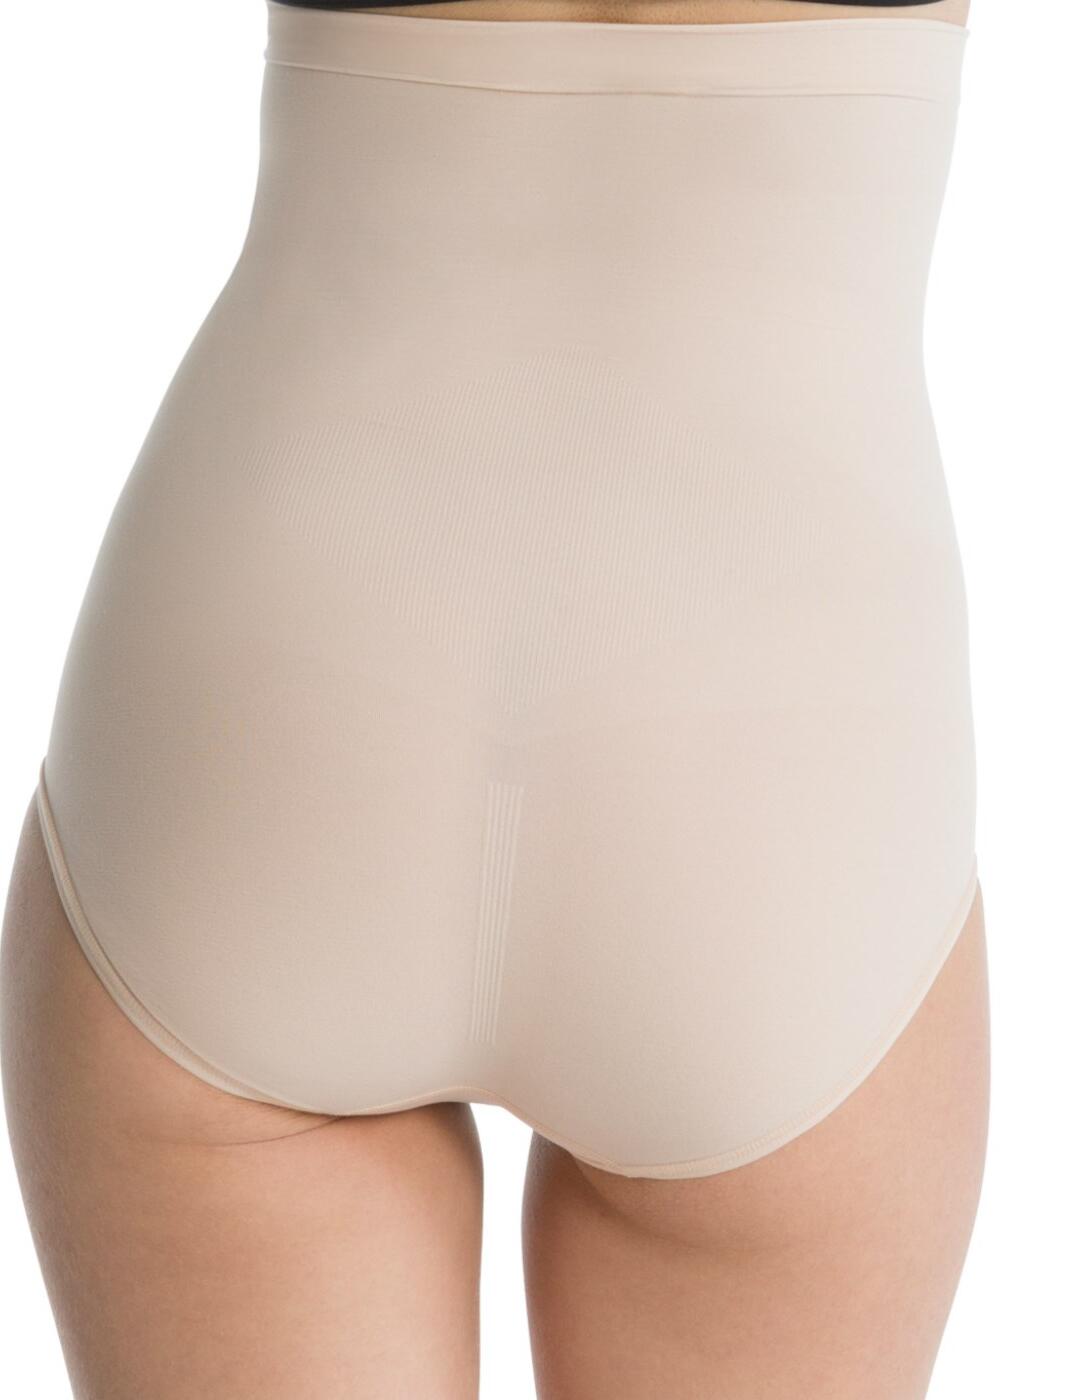 Spanx Soft Nude Higher Power Shaper Panties Women's Size Large NEW